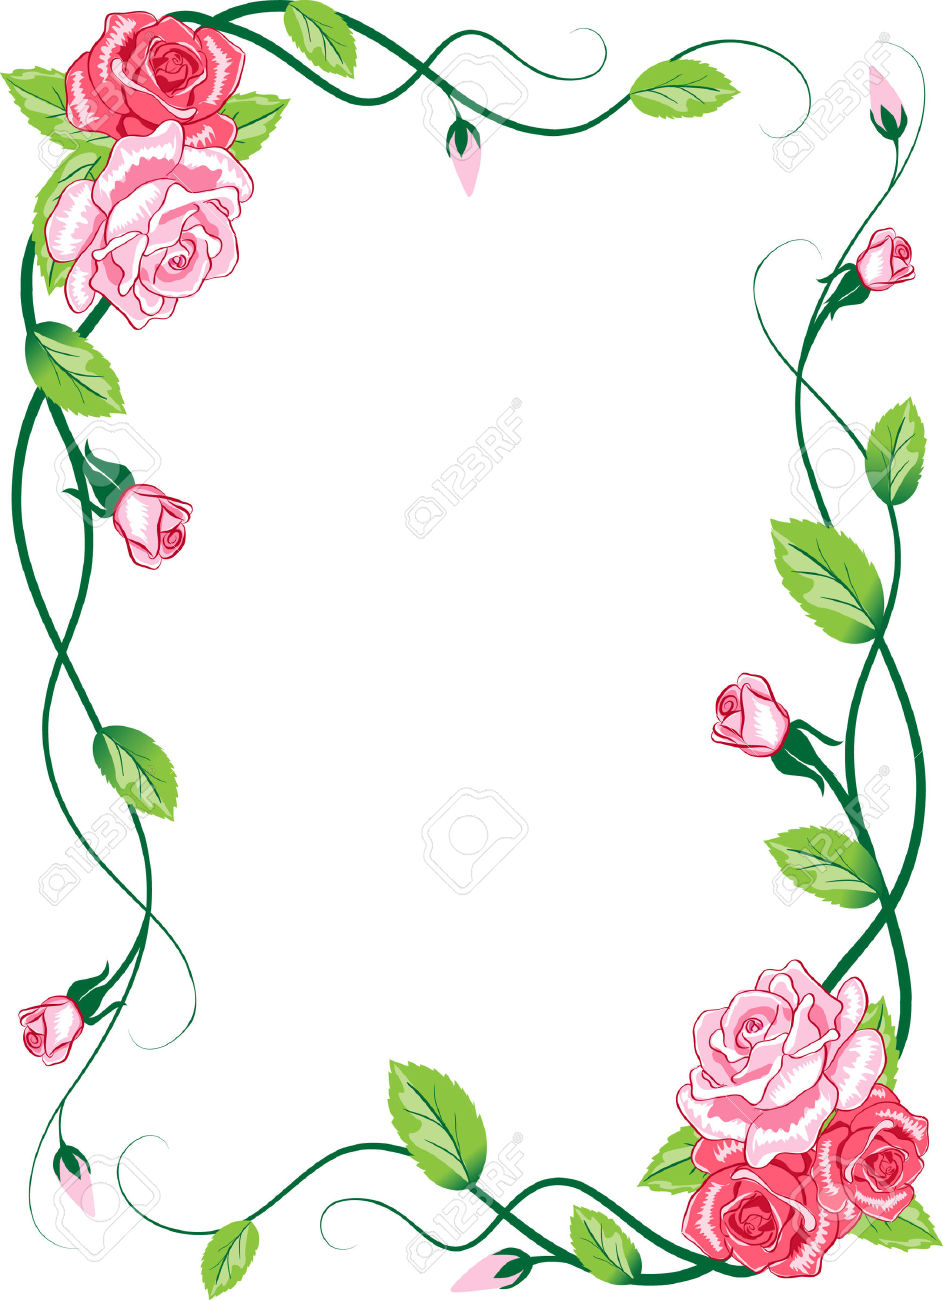 Download rose flower borders - Clipground